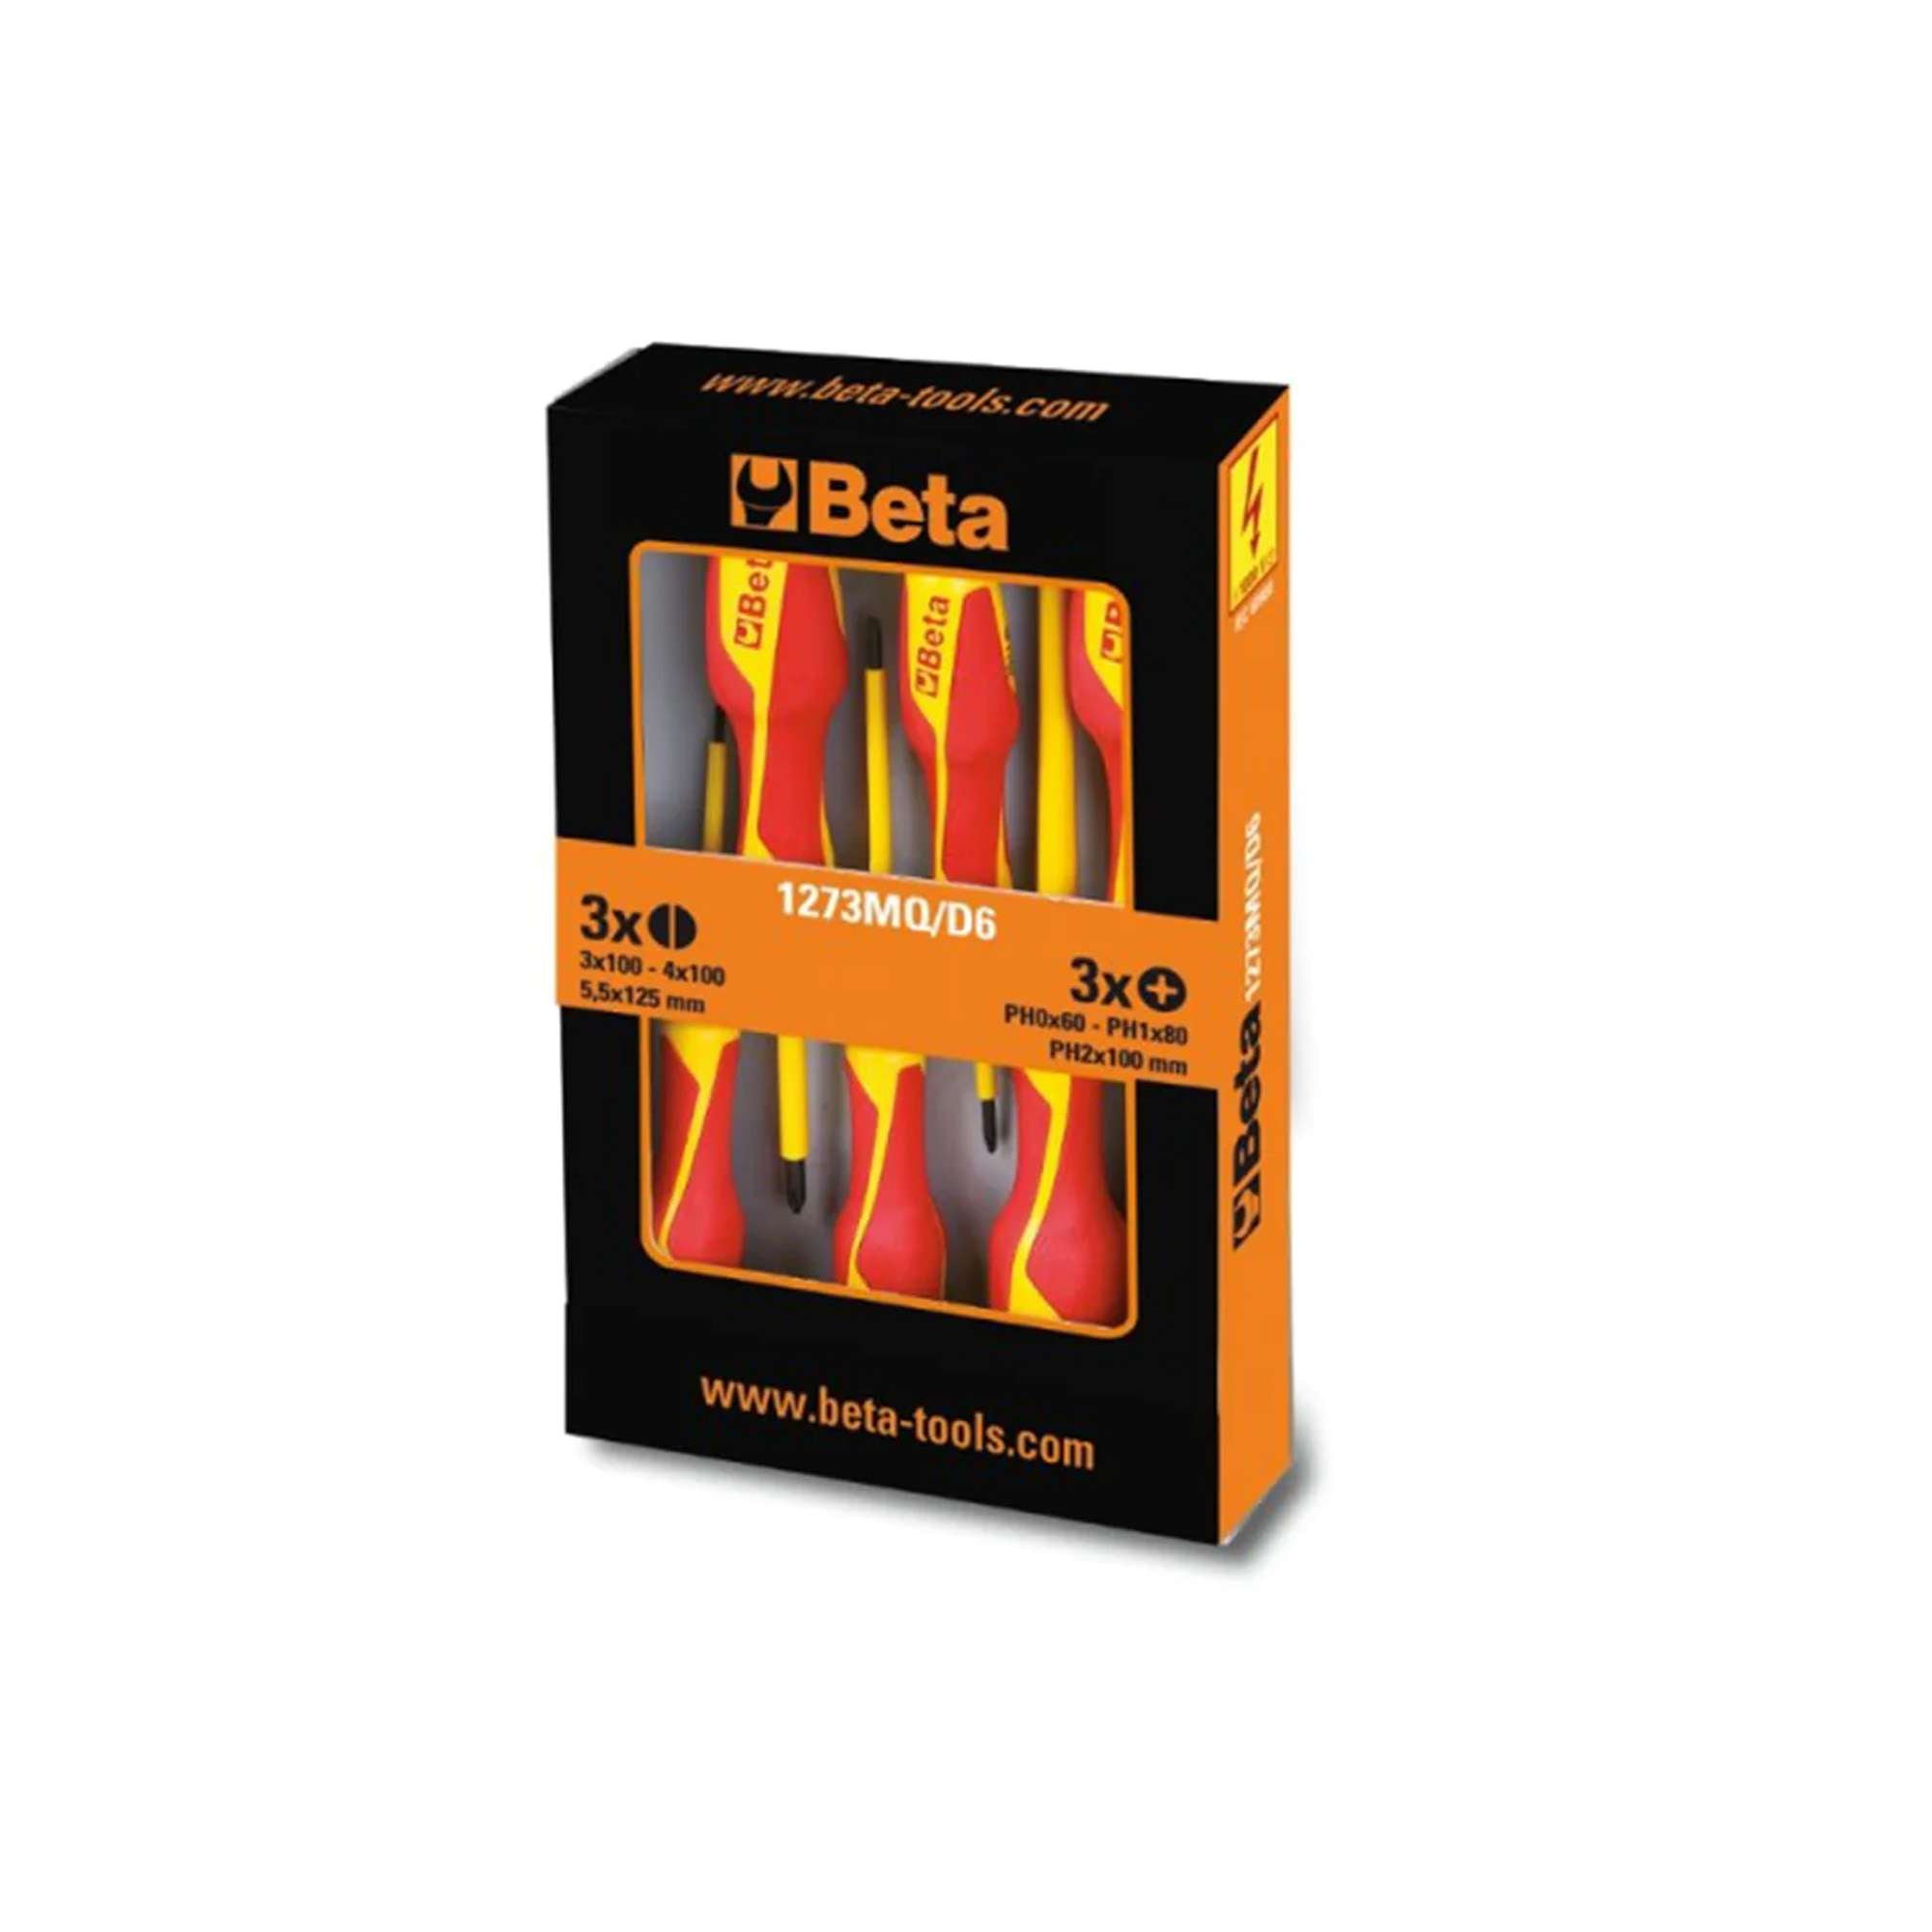 Set of 6 1000V insulated screwdrivers, 3 parallel blade and 3 Phillips - Beta